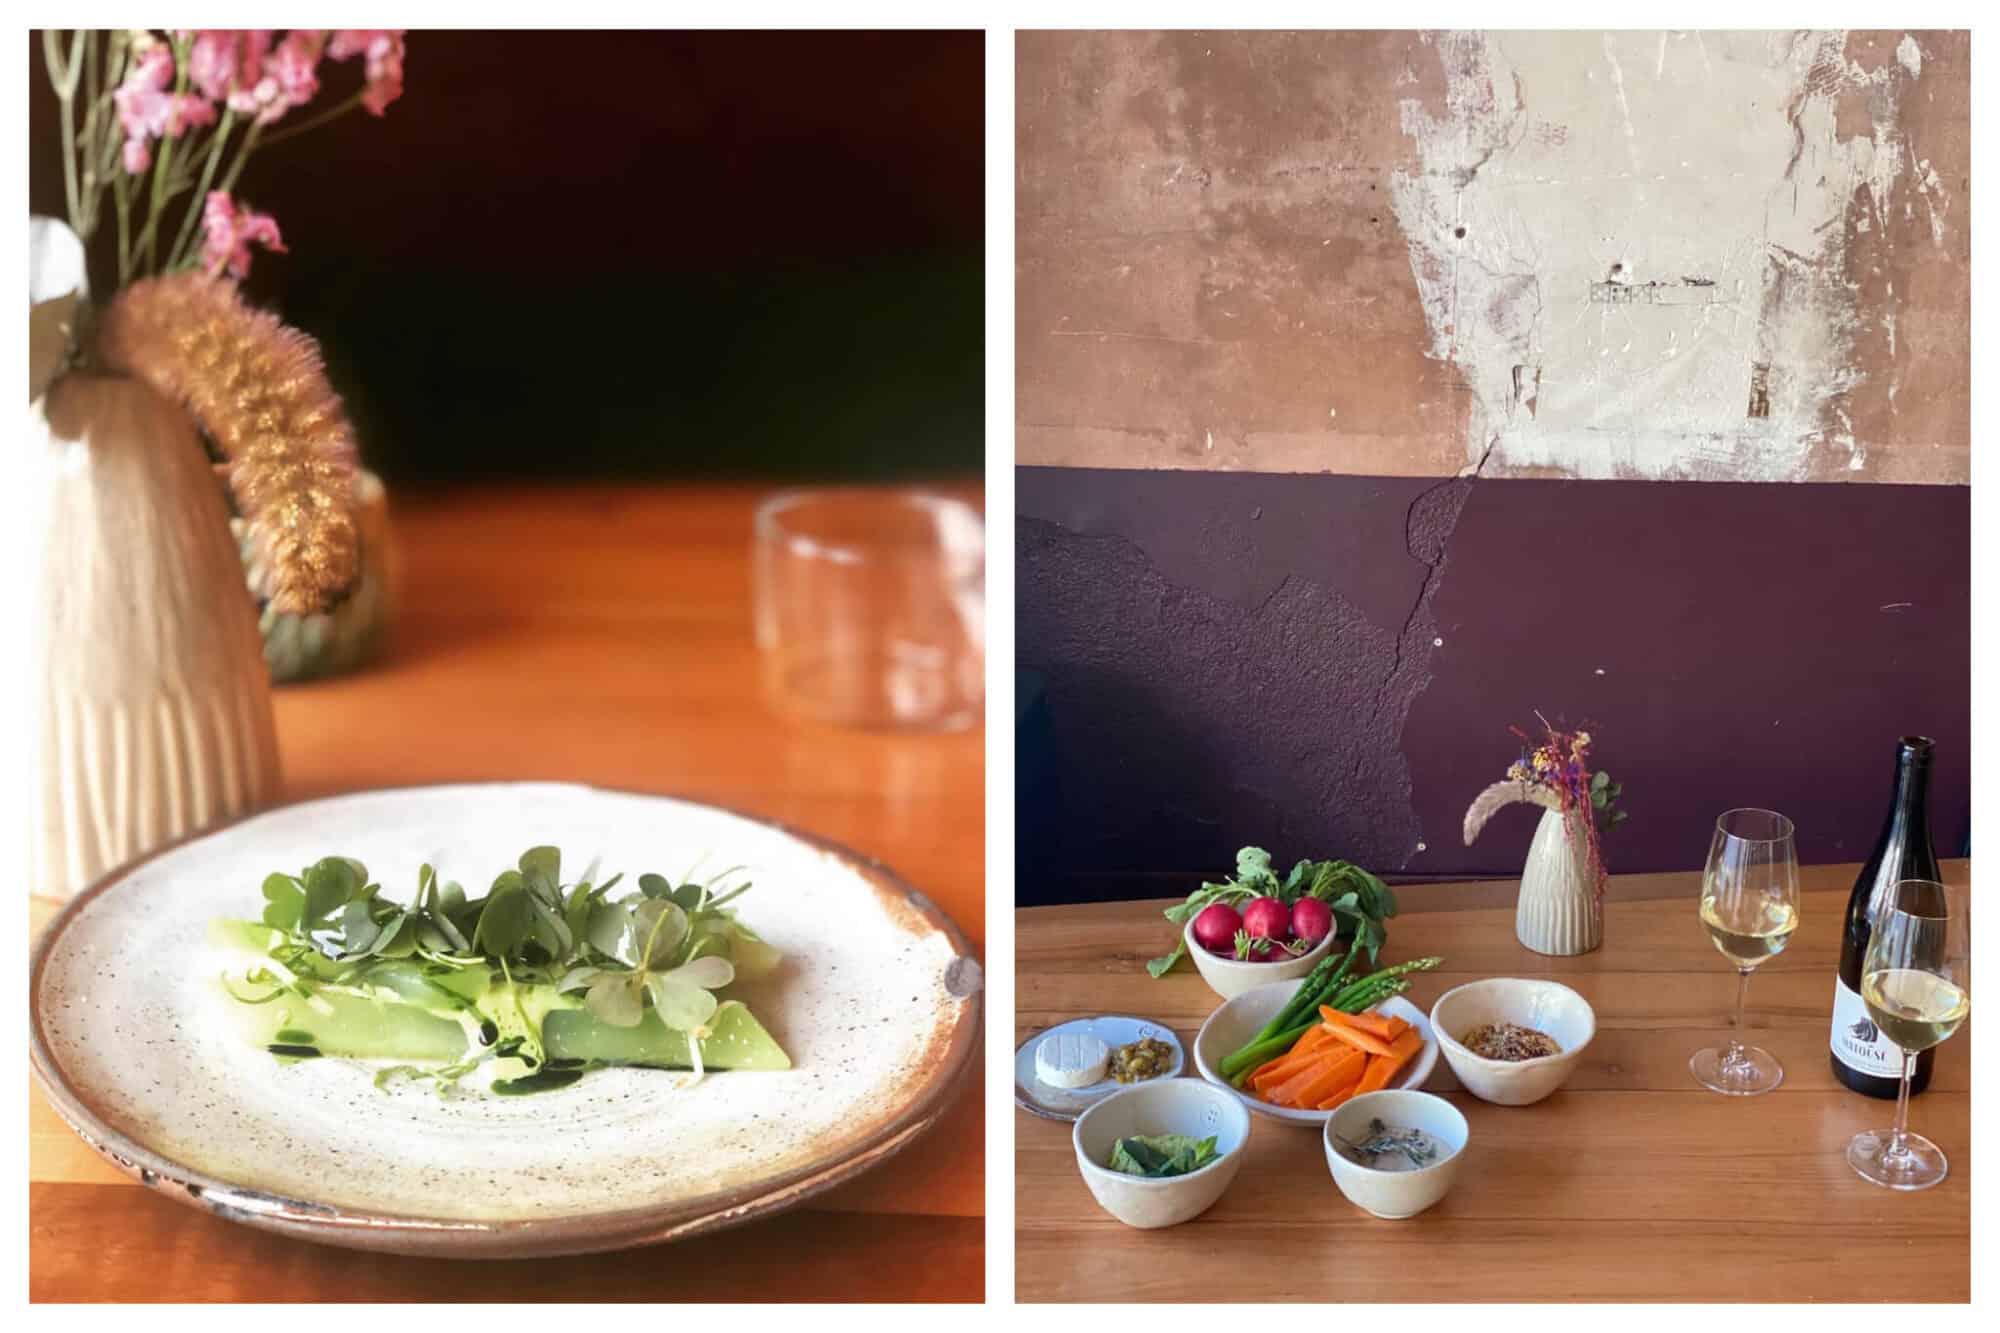 Left: a meal of artfully plated green vegetables.
Right: small bowls of crudites including radishes, carrots, as well as cheese and nuts, all next to a small vase of flowers and a bottle + two glasses of white wine.